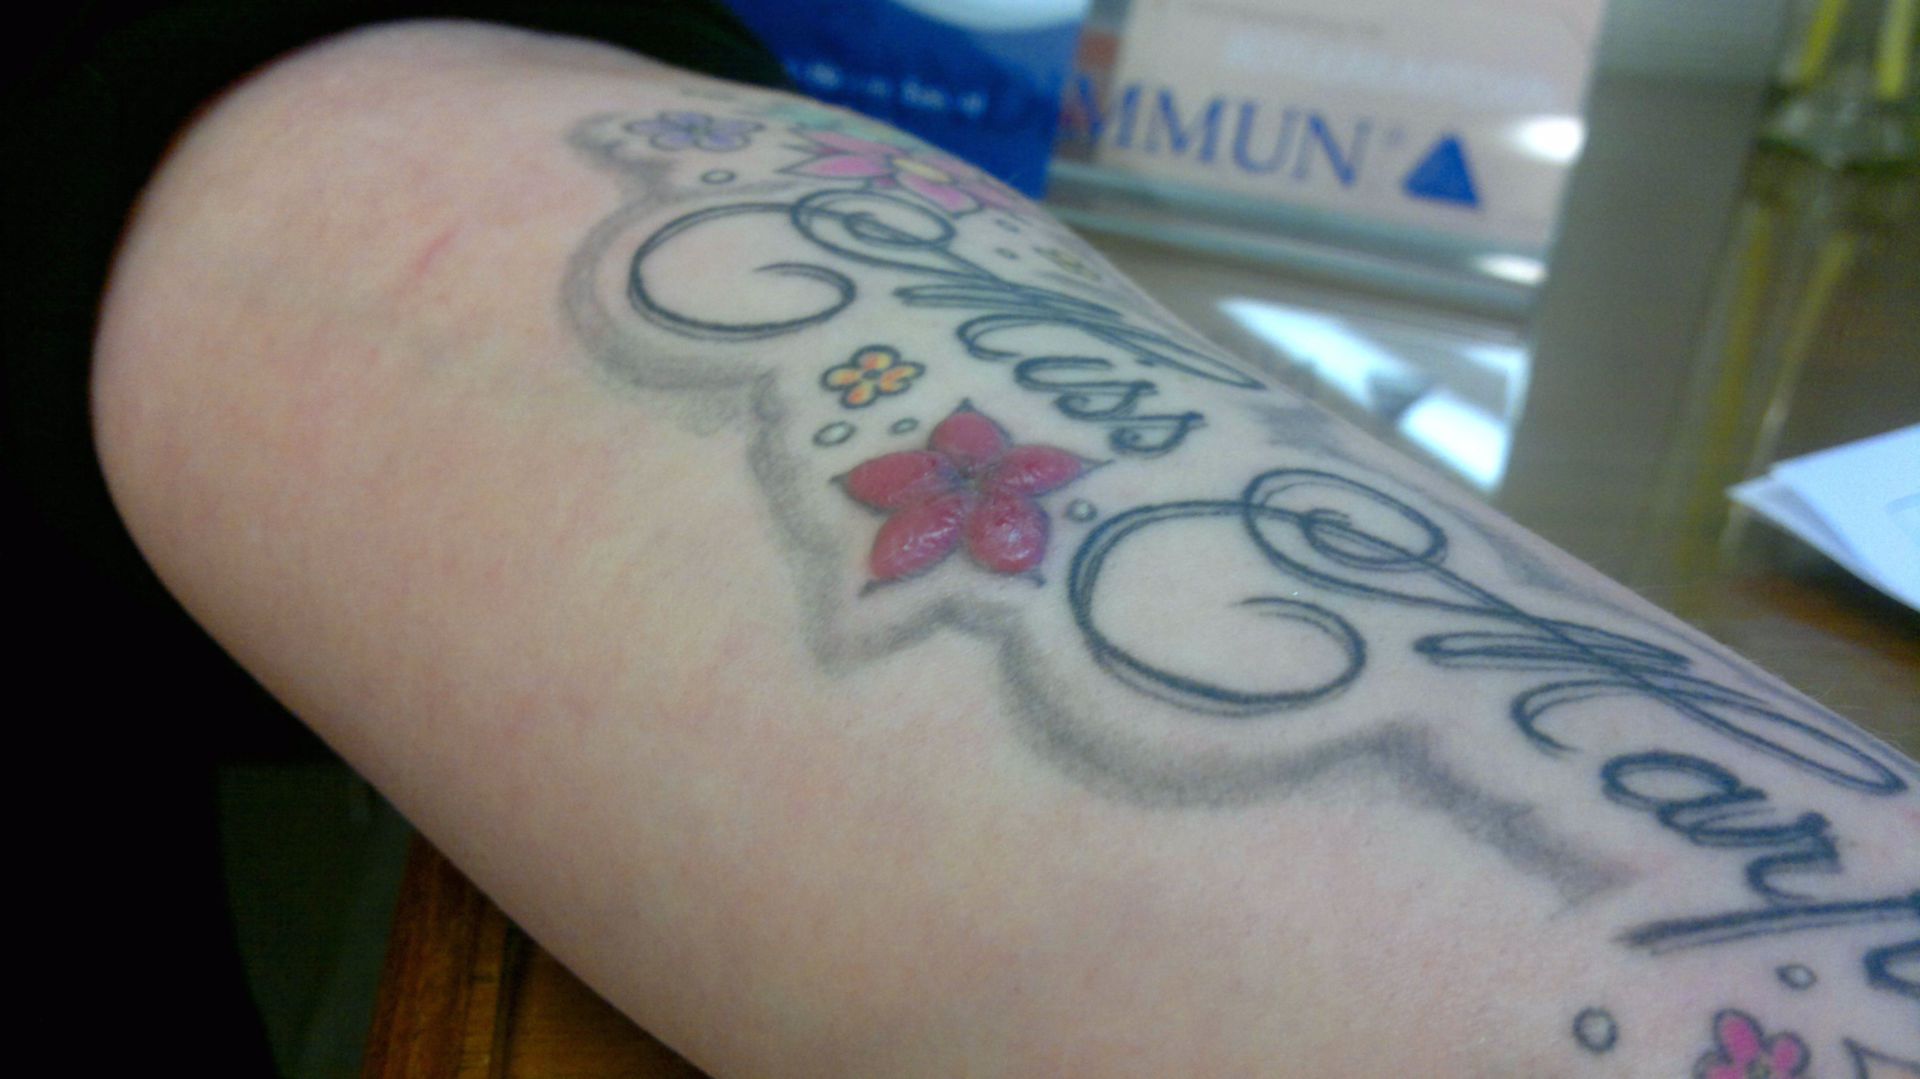 Safety tattoos, bands warn of kids' deadly allergies